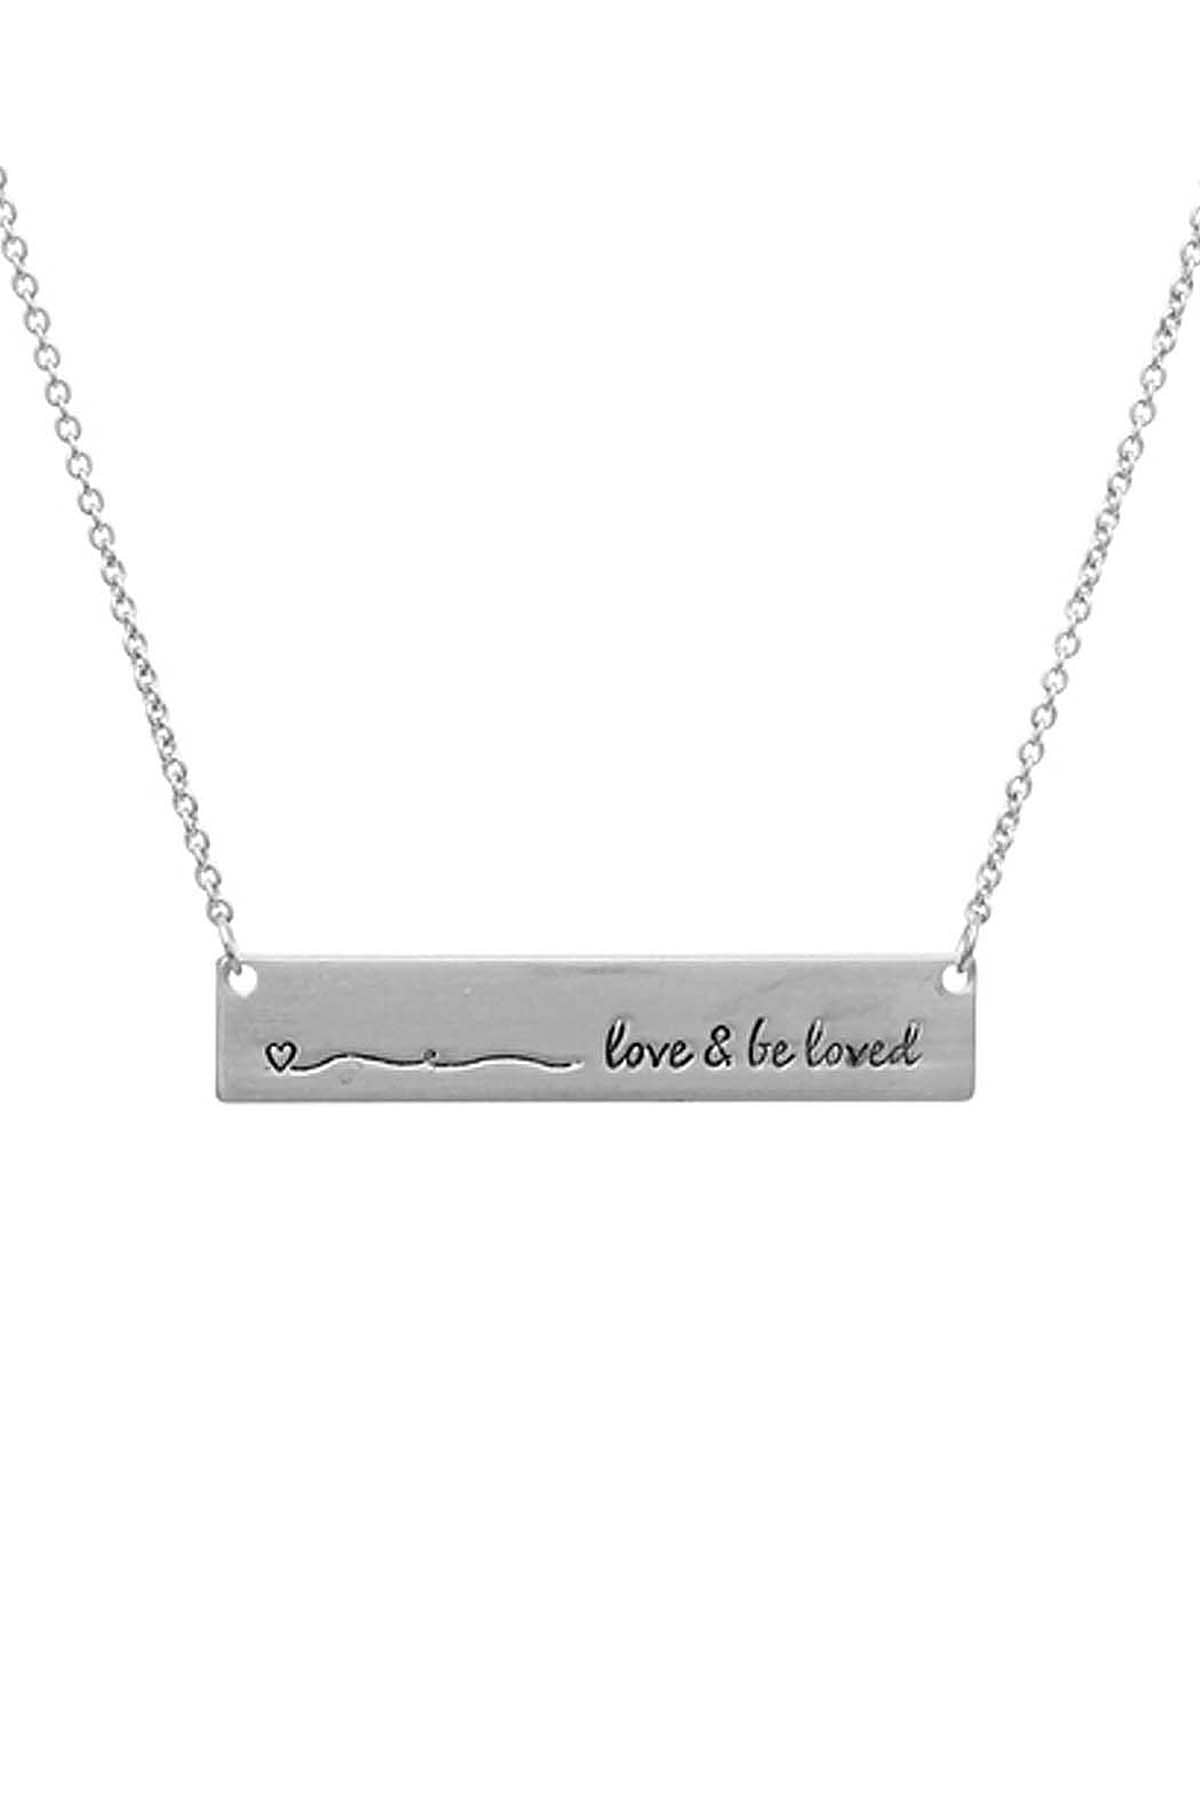 16430 - BAR LOVE AND BE LOVED NECKLACE: ROSE GOLD